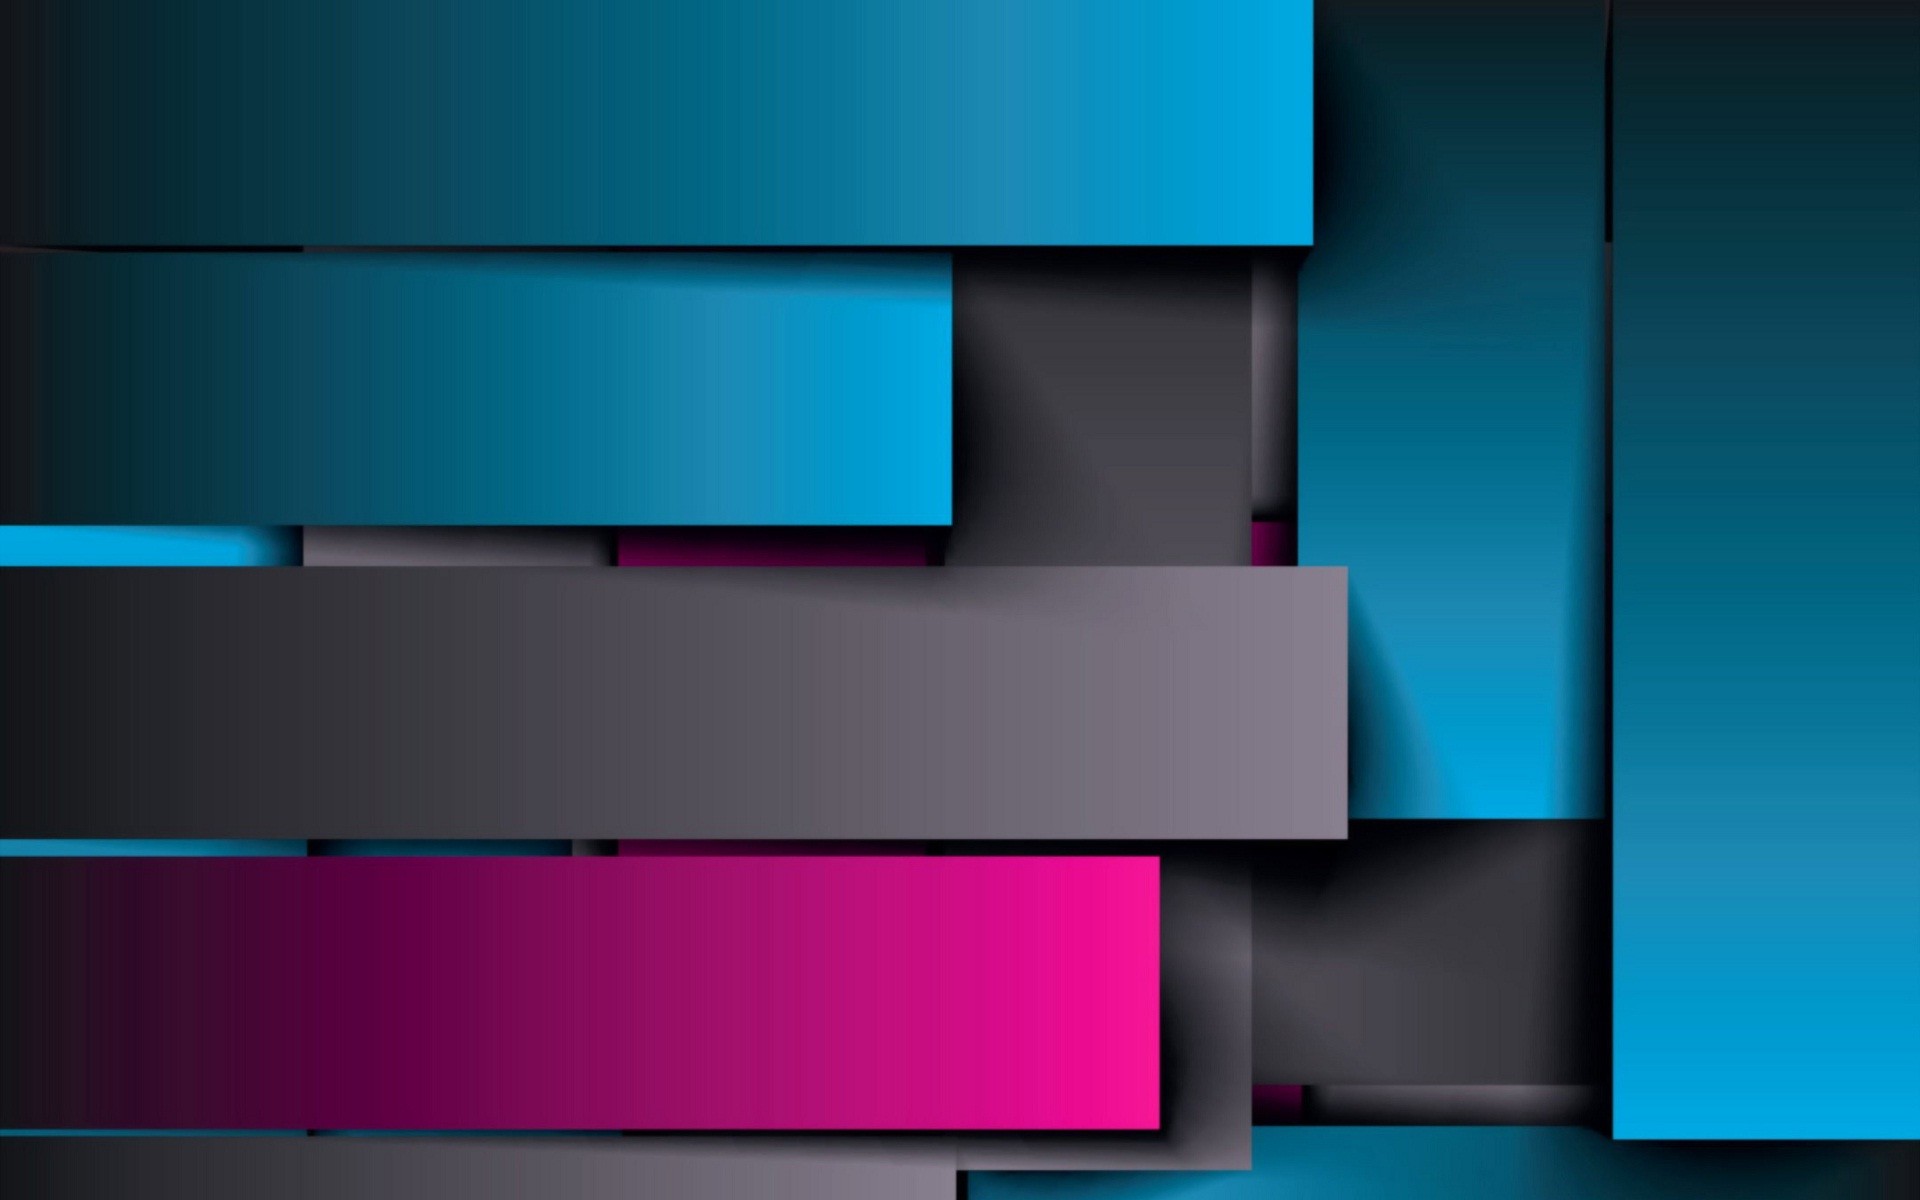 Shodow shine blue and pink abstract wallpaper